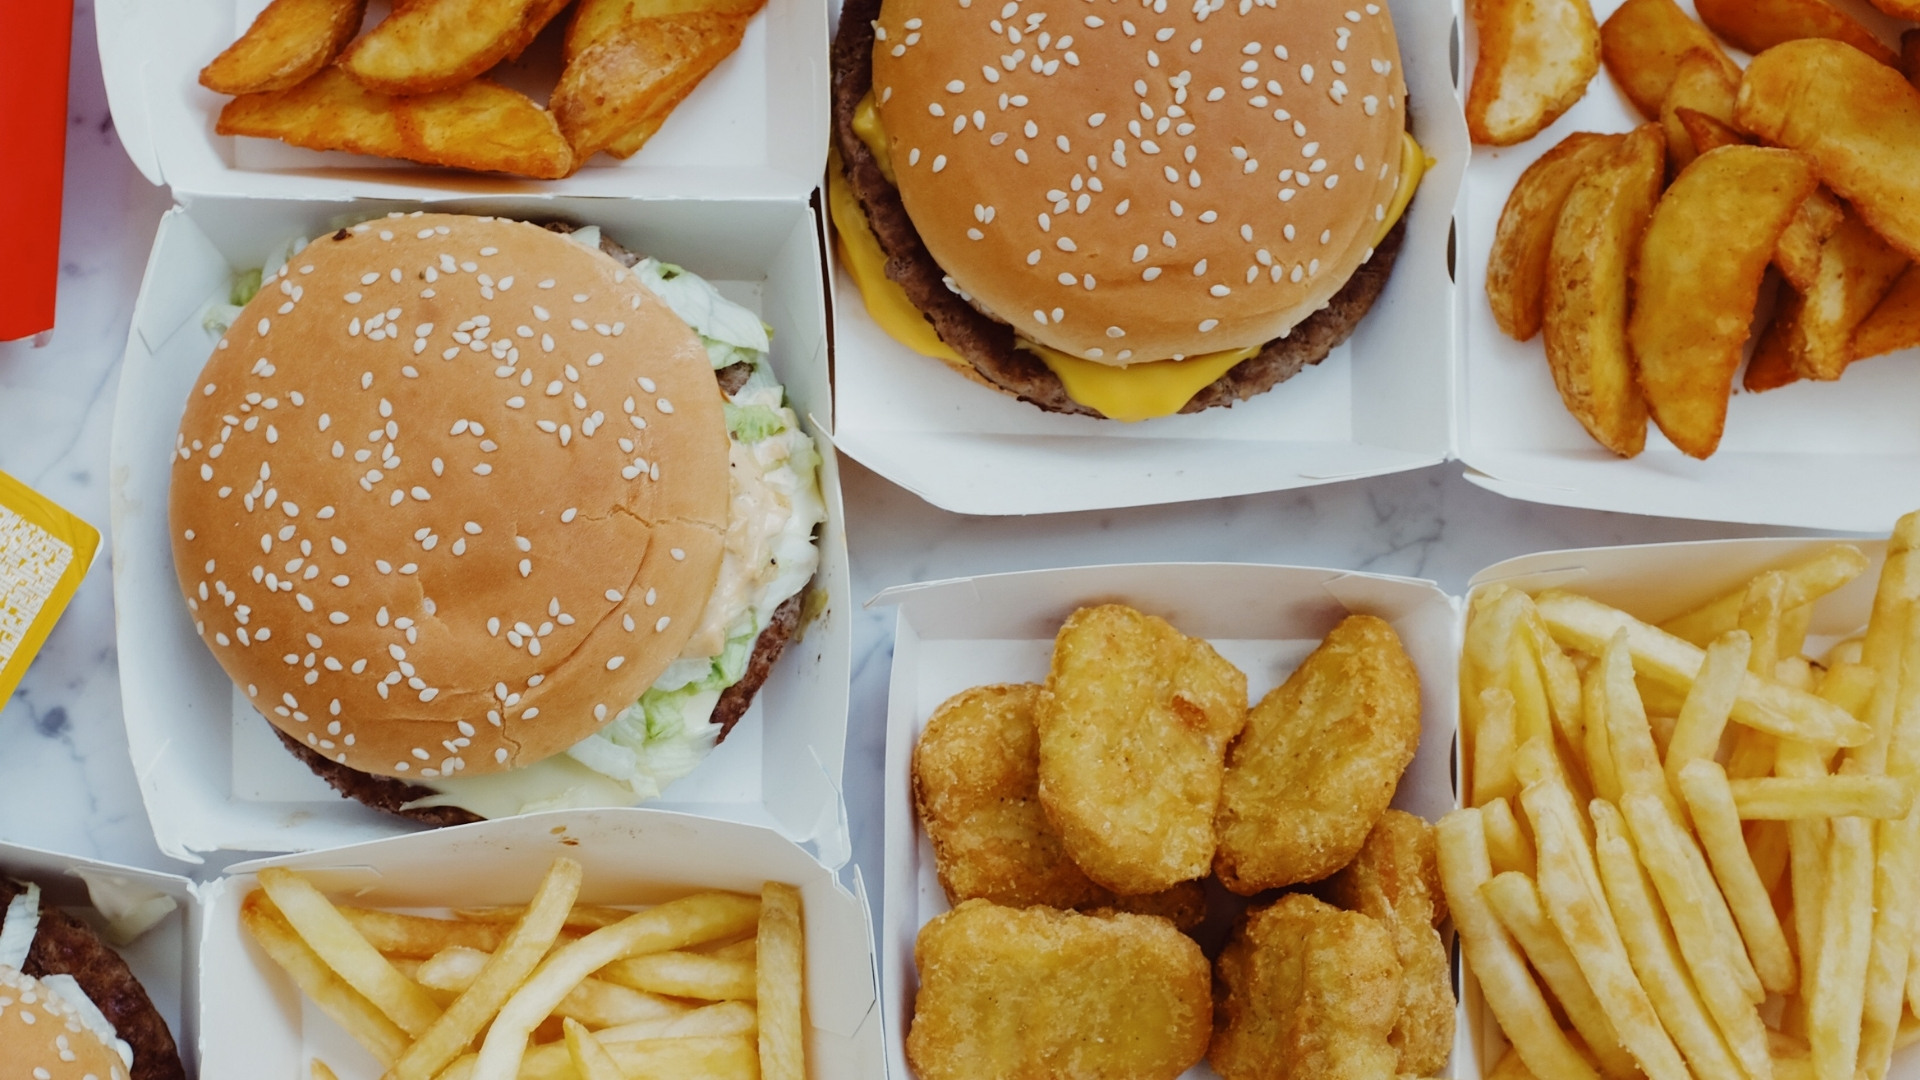 Not forever chemicals: Burger King pledges to eliminate PFAS from food  packaging worldwide